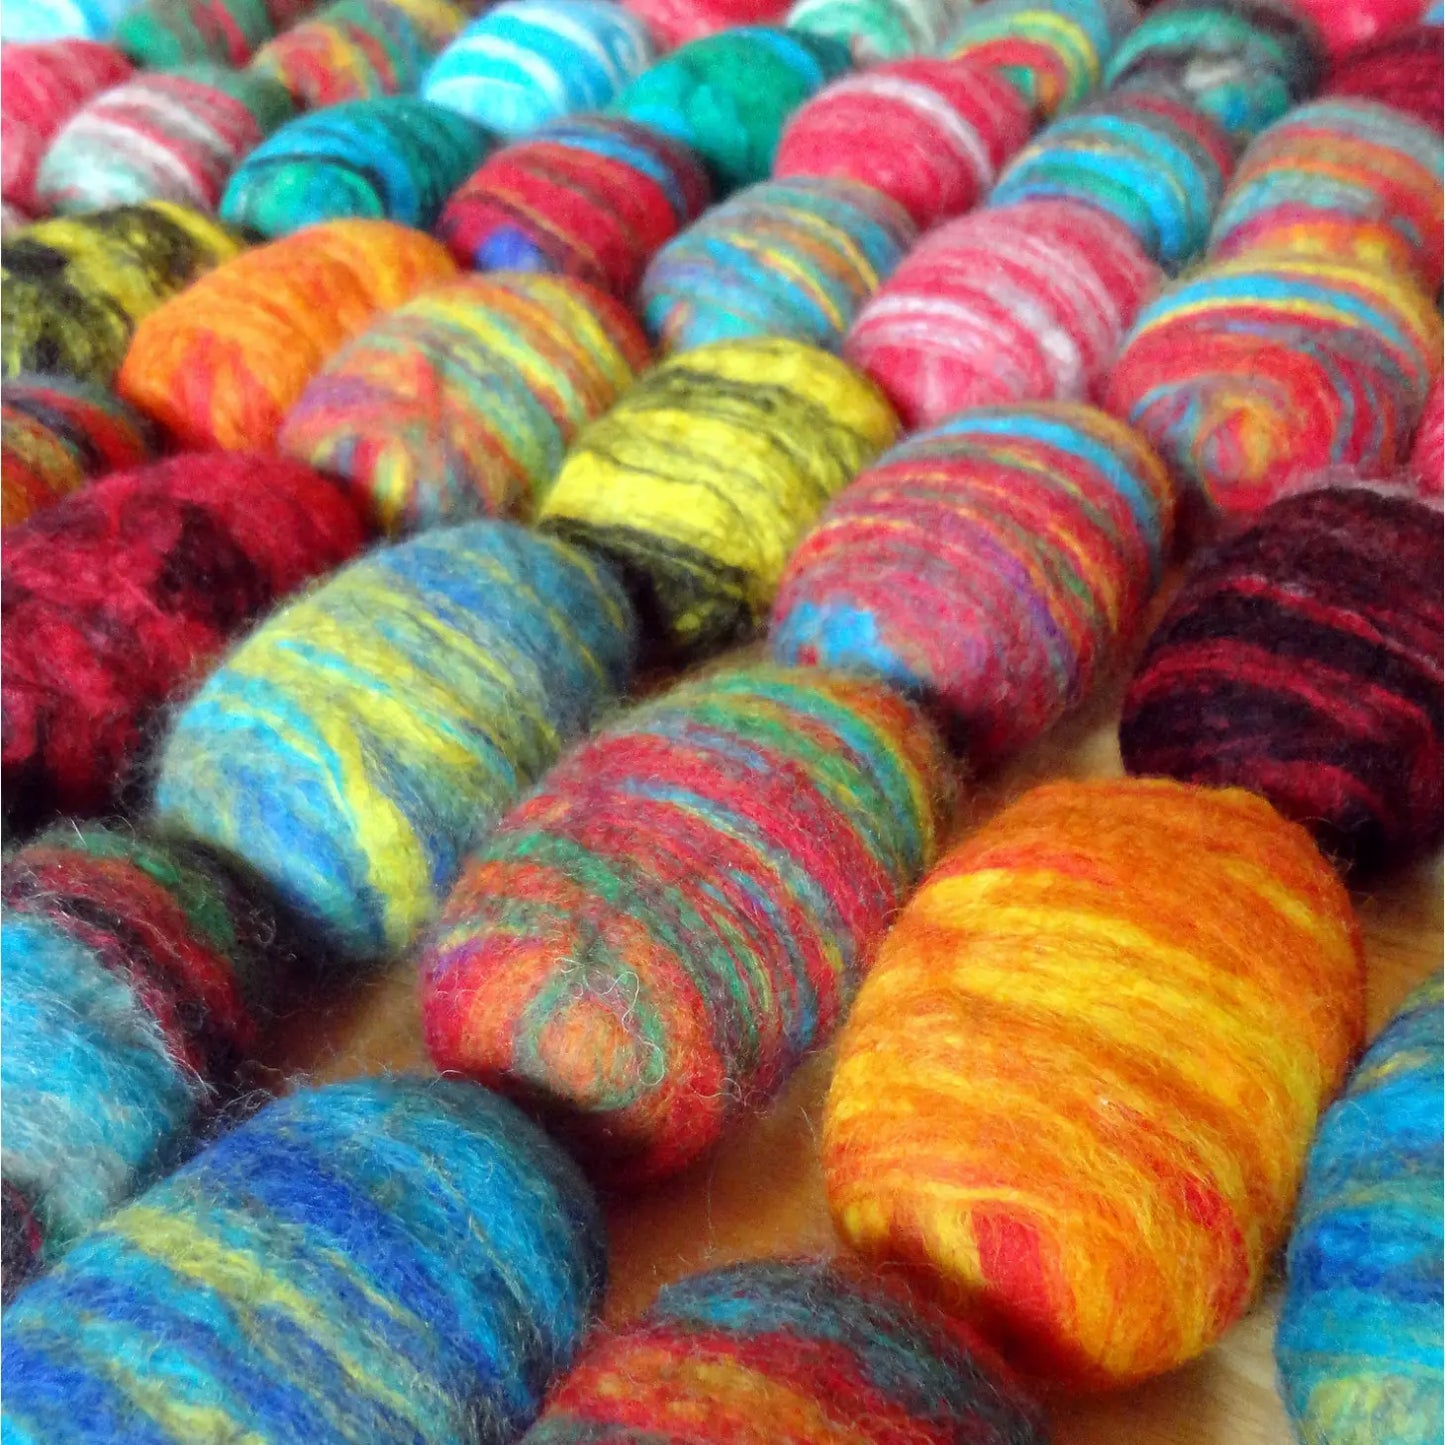 Felted Soap Multi Colored